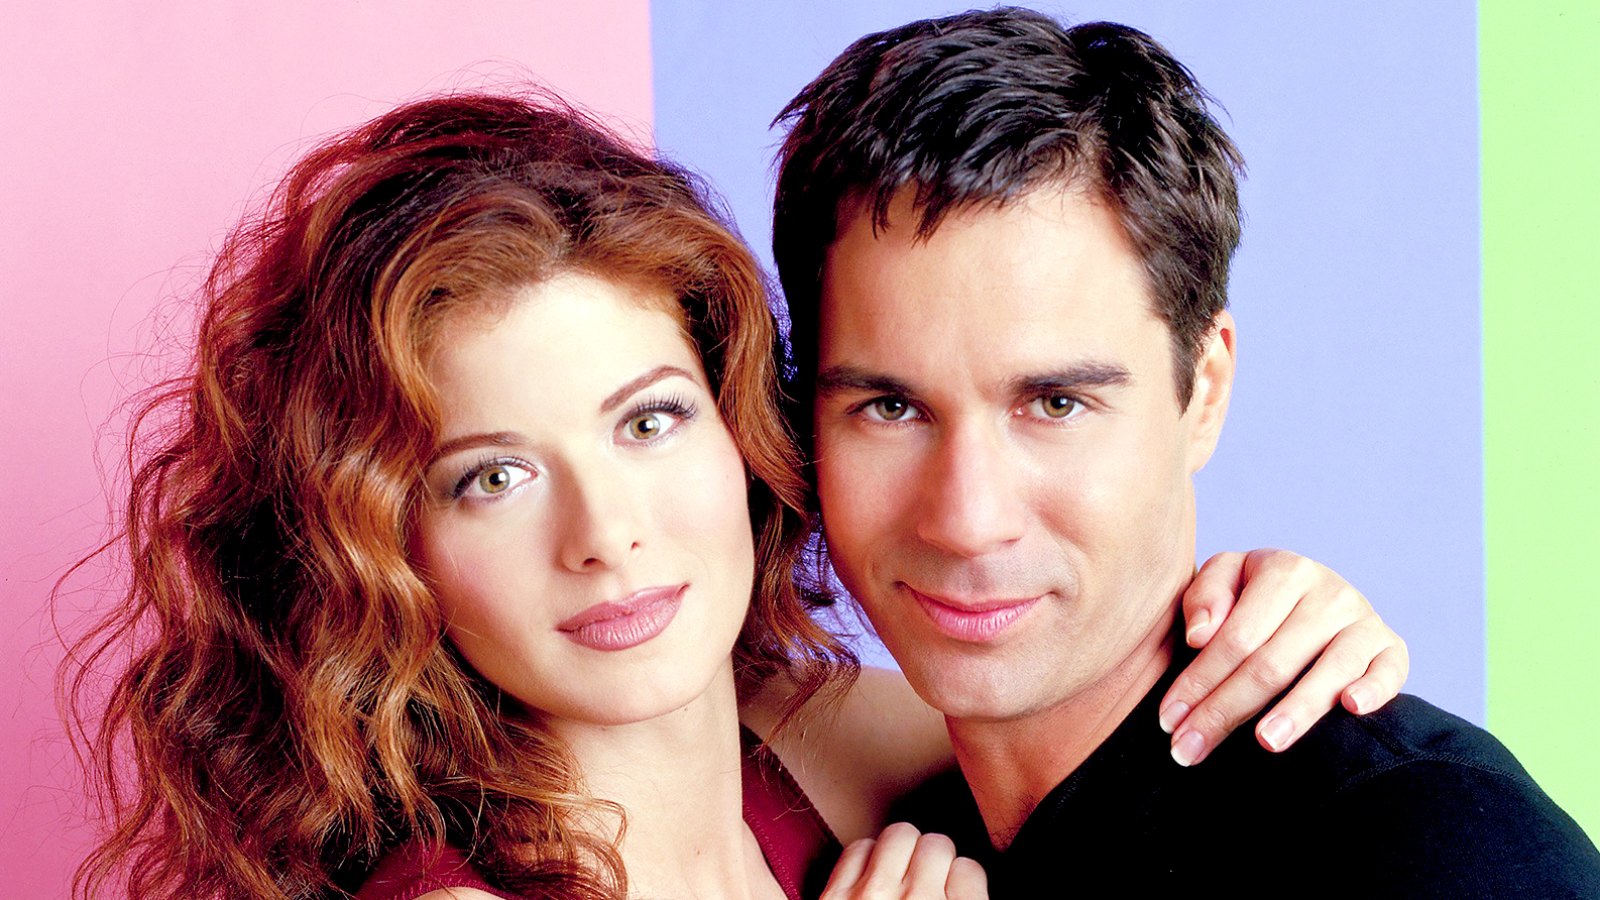 Debra Messing as Grace Adler and Eric McCormack as Will Truman on Will & Grace